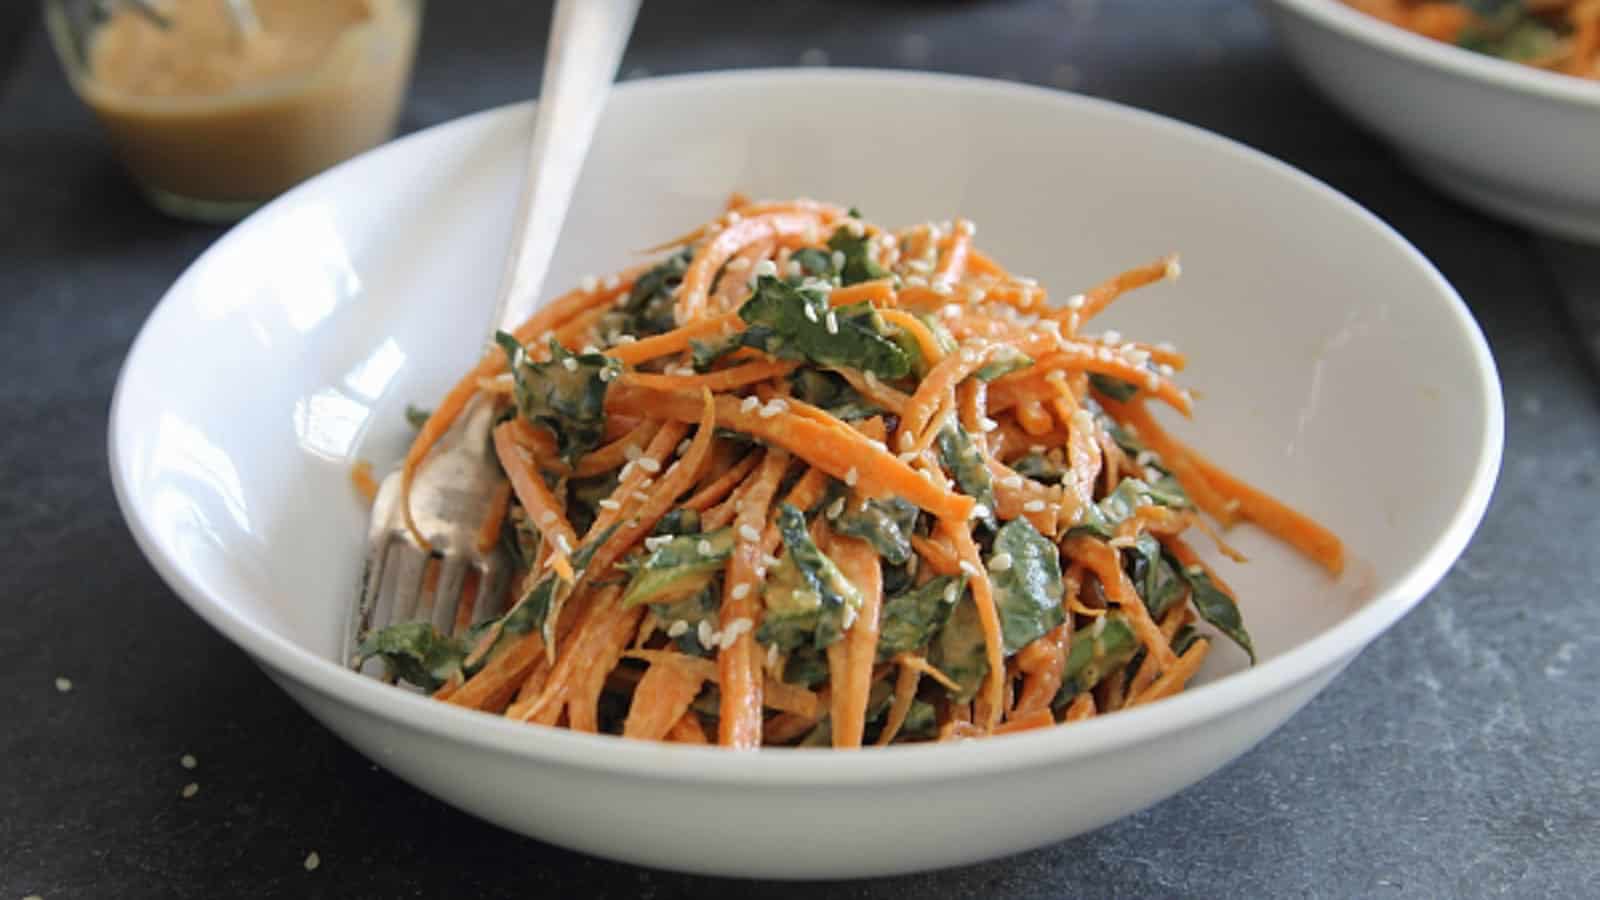 Spicy Thai carrot and kale salad in a white bowl with a fork.